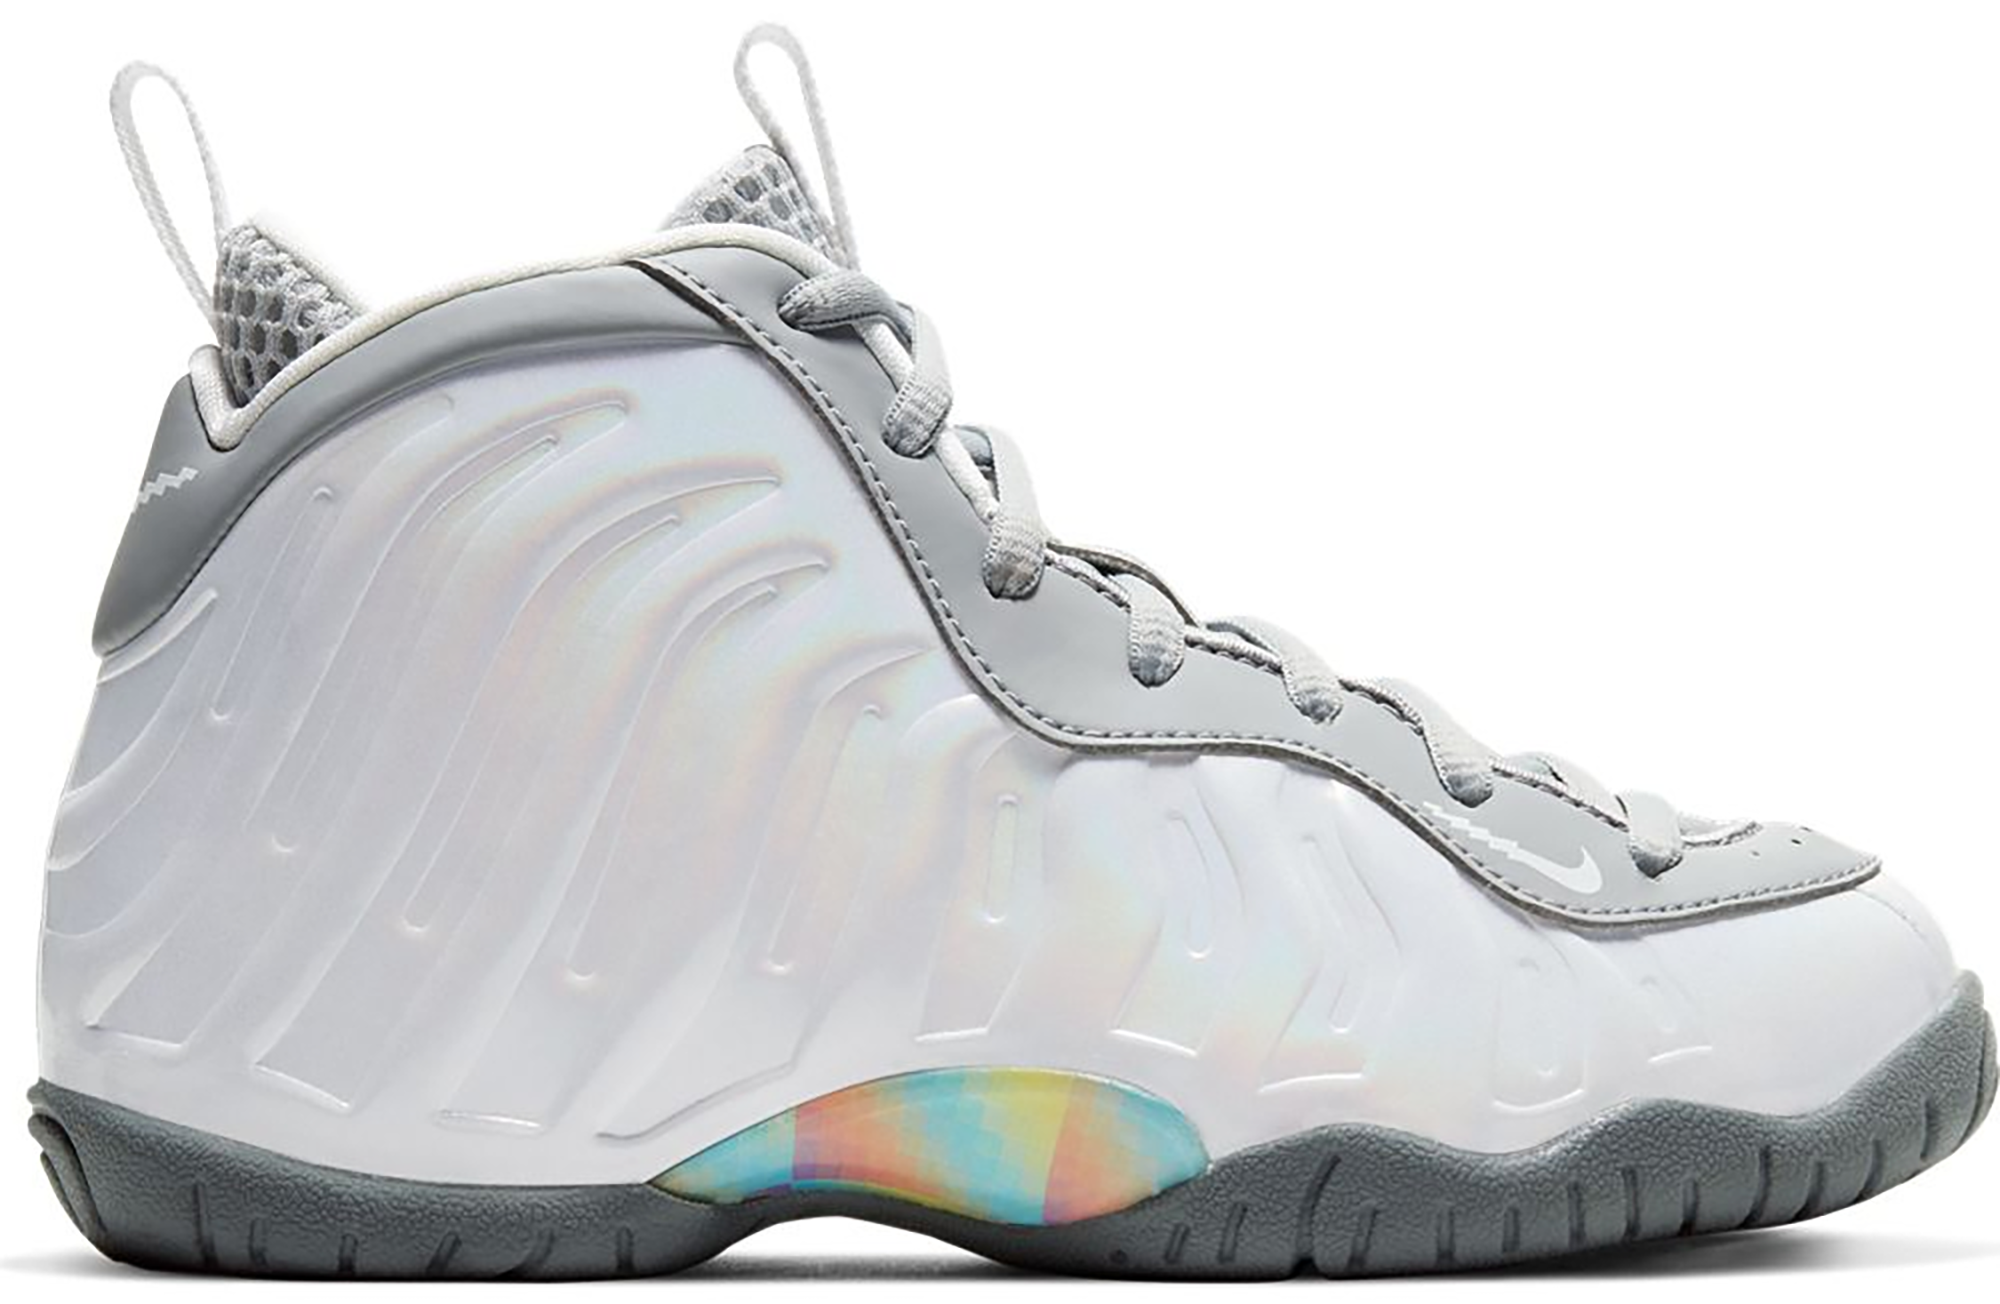 grey and white foamposites